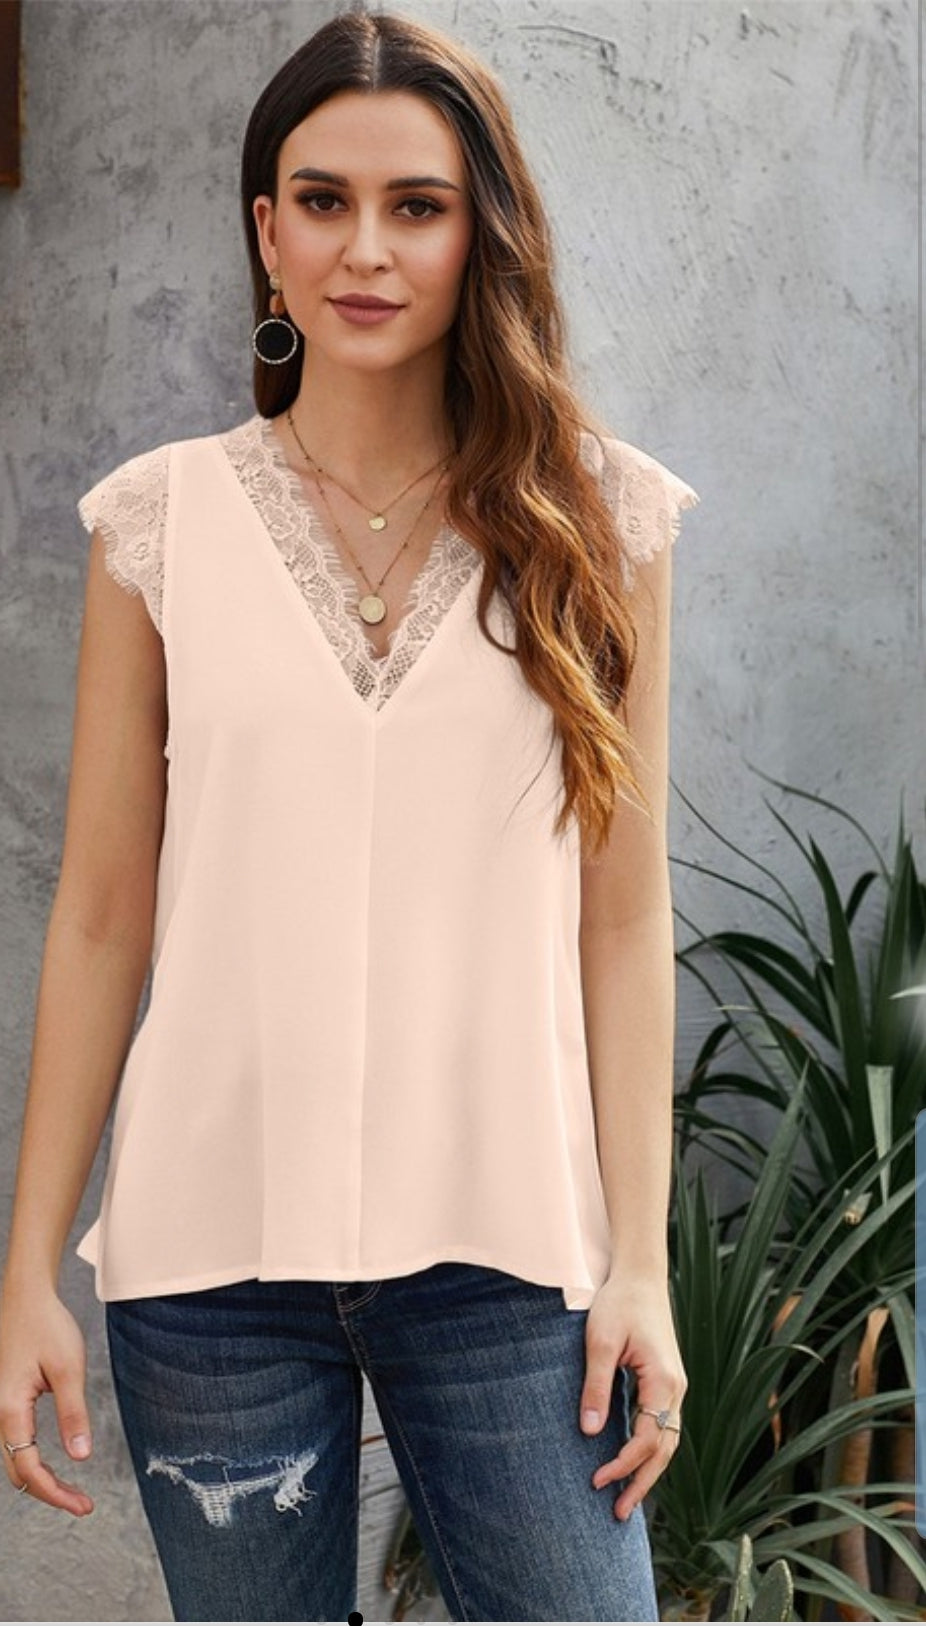 Loving On You Reversible Lace Top S-2XL